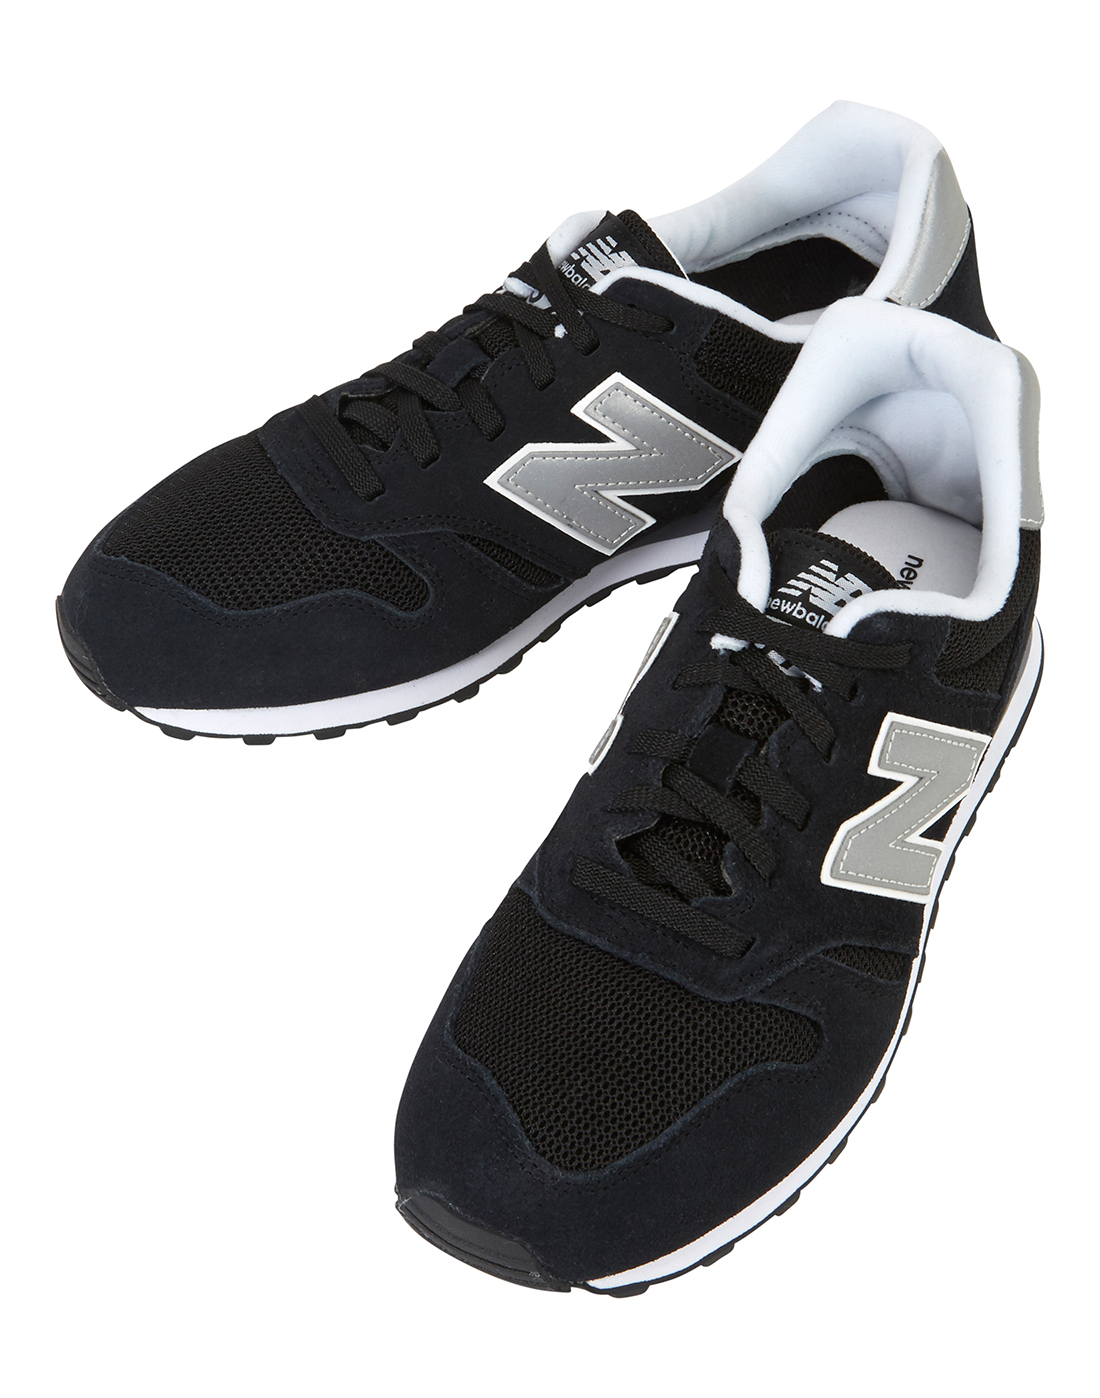 new balance football boots size guide